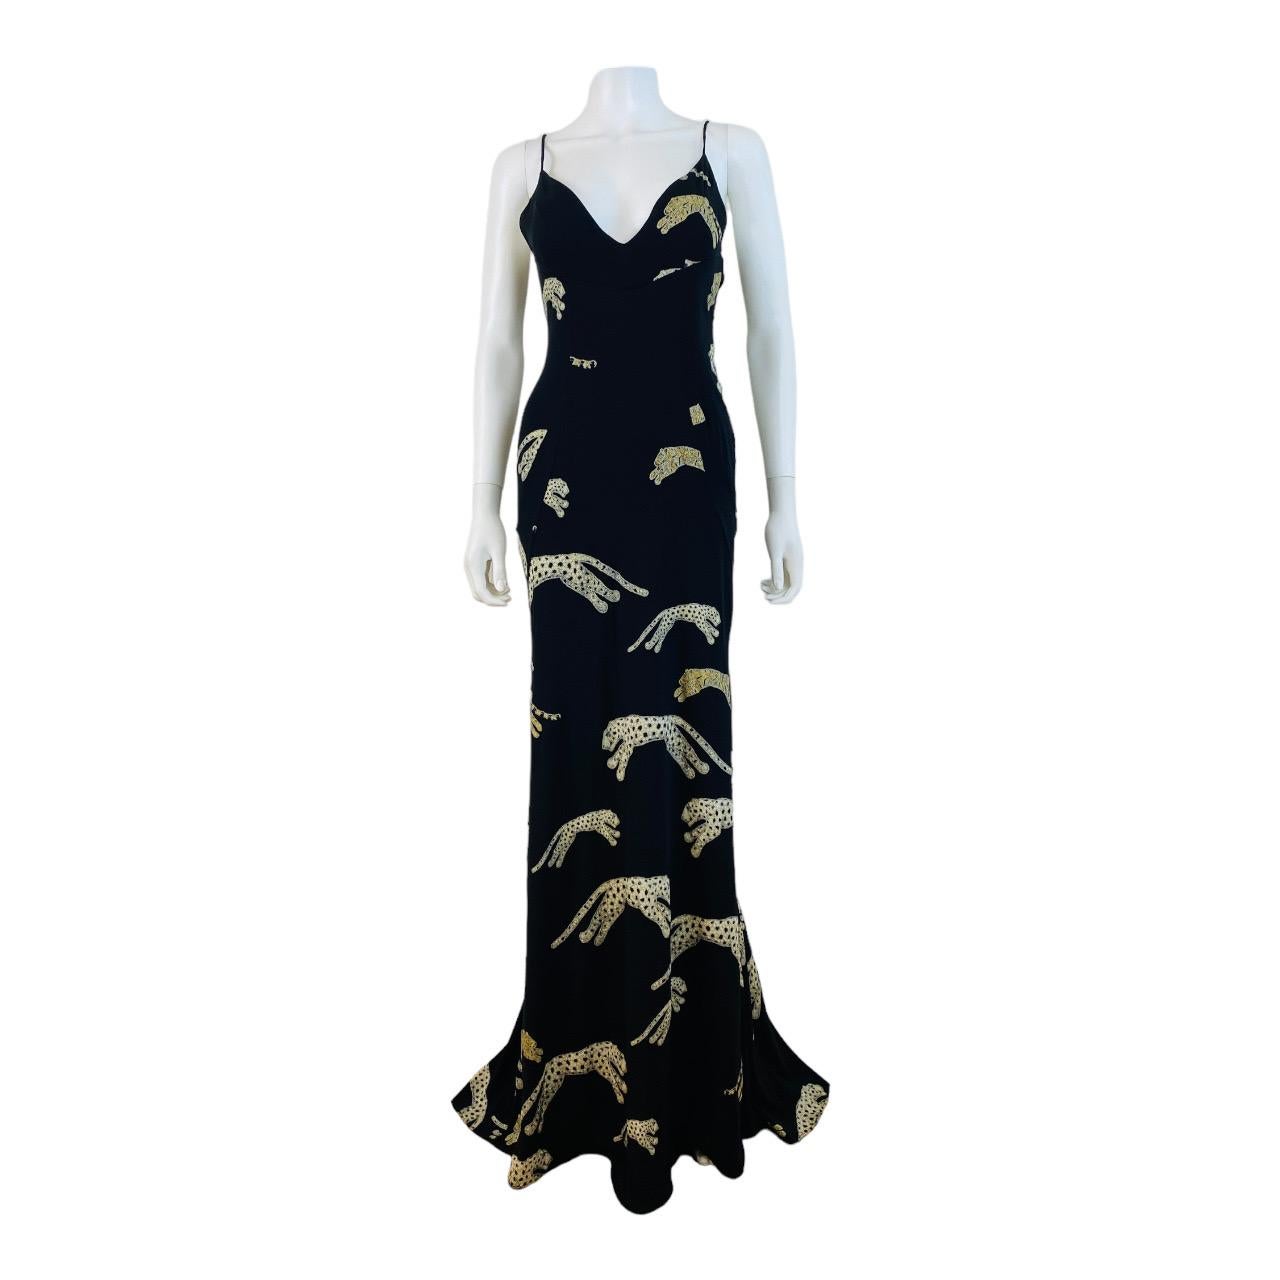 Stunning F/W 2002 Roberto Cavalli dress gown
Black stretch silk fabric with white leopards throughout
Metallic painted look effect on leopards + green metallic eyes
V neckline
Fitted bust detail
Long form fitted style
Flared